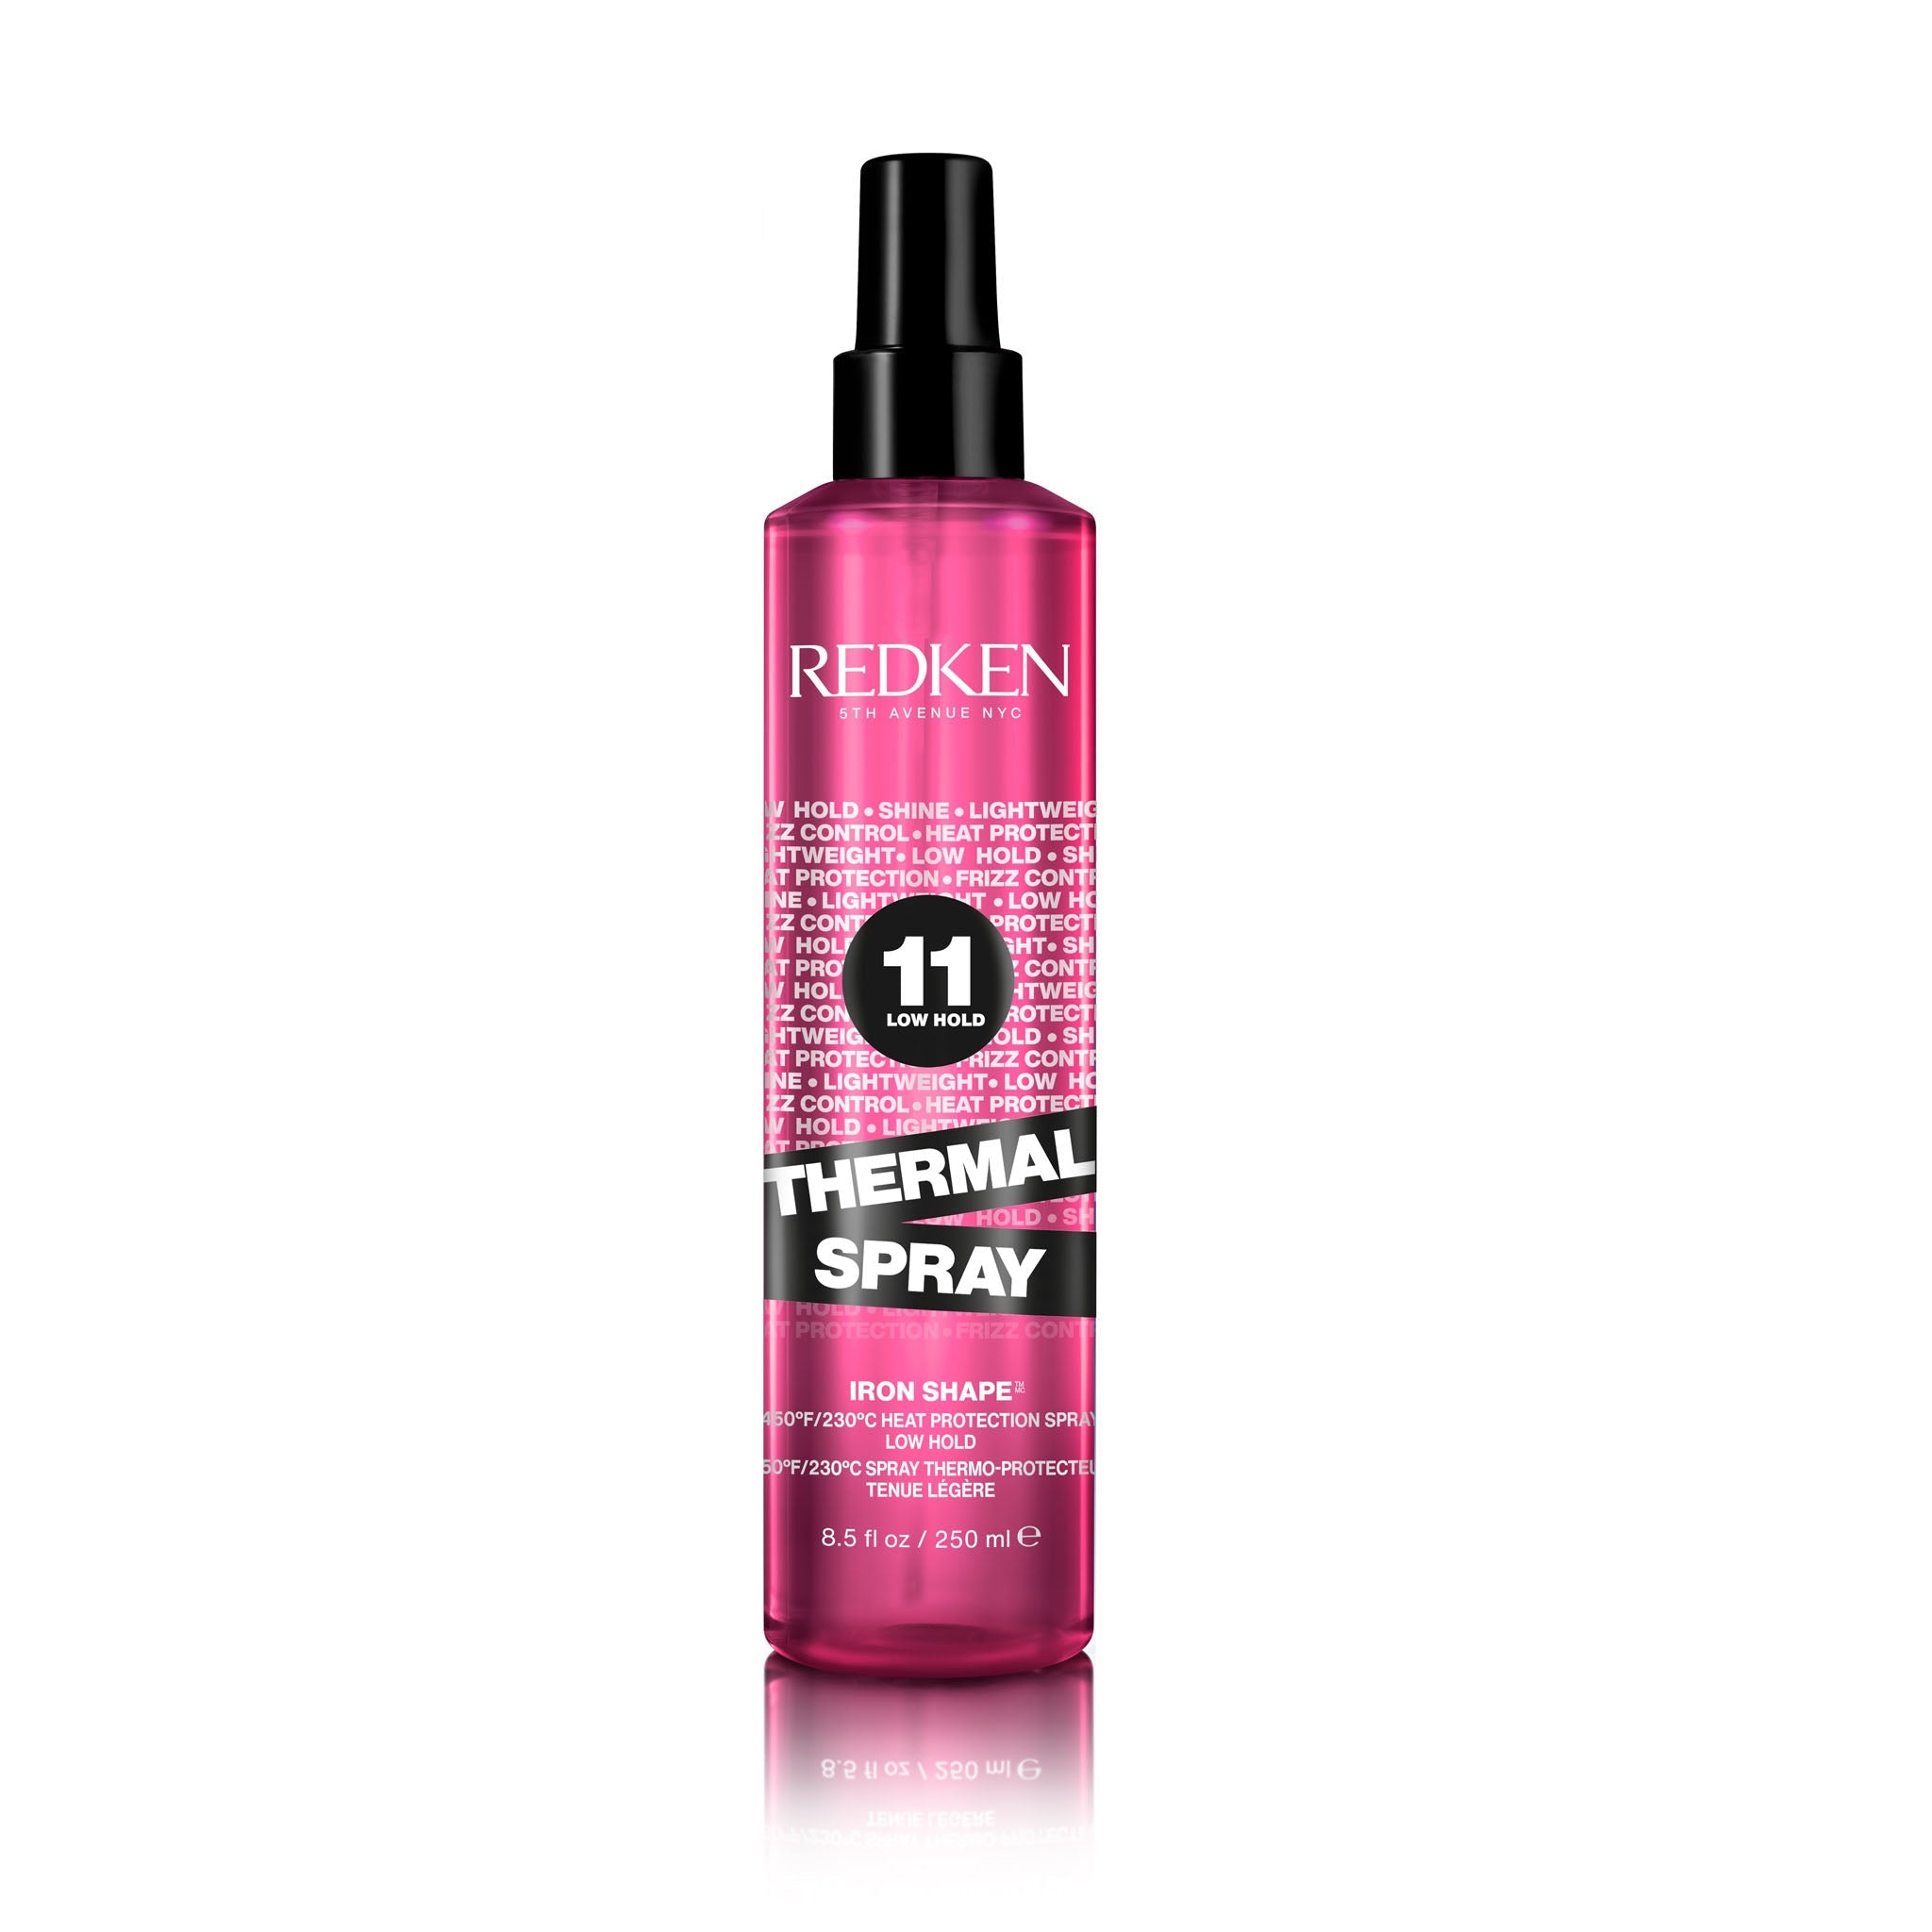 Redken. Spray Thermal Tenue Legere Low Hold 11 - 250ml - Concept C. Shop